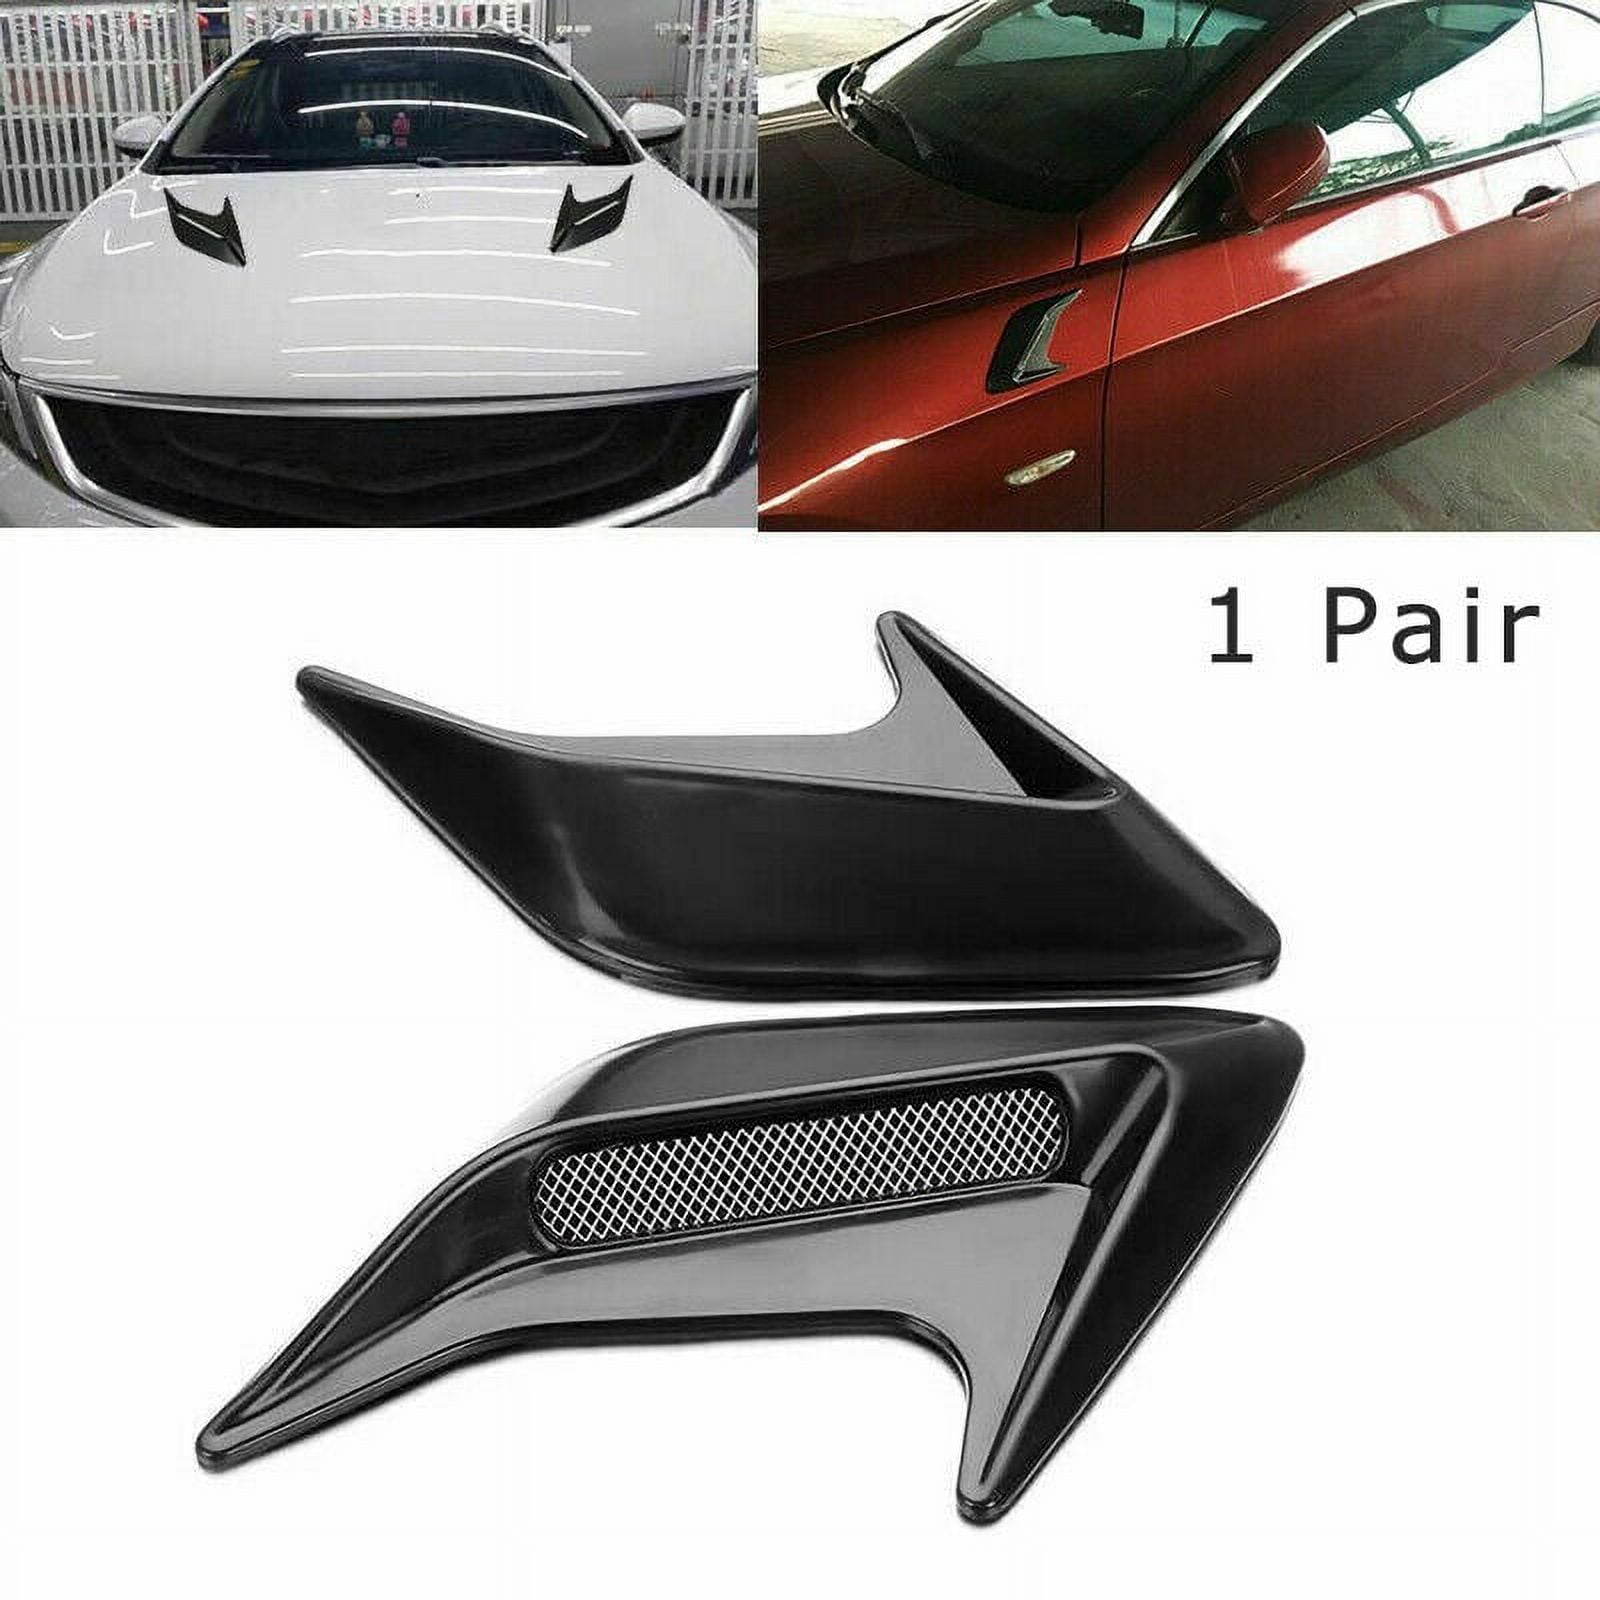 Universal Car-styling Hood Air Flow Intake Vent Cover Sticker